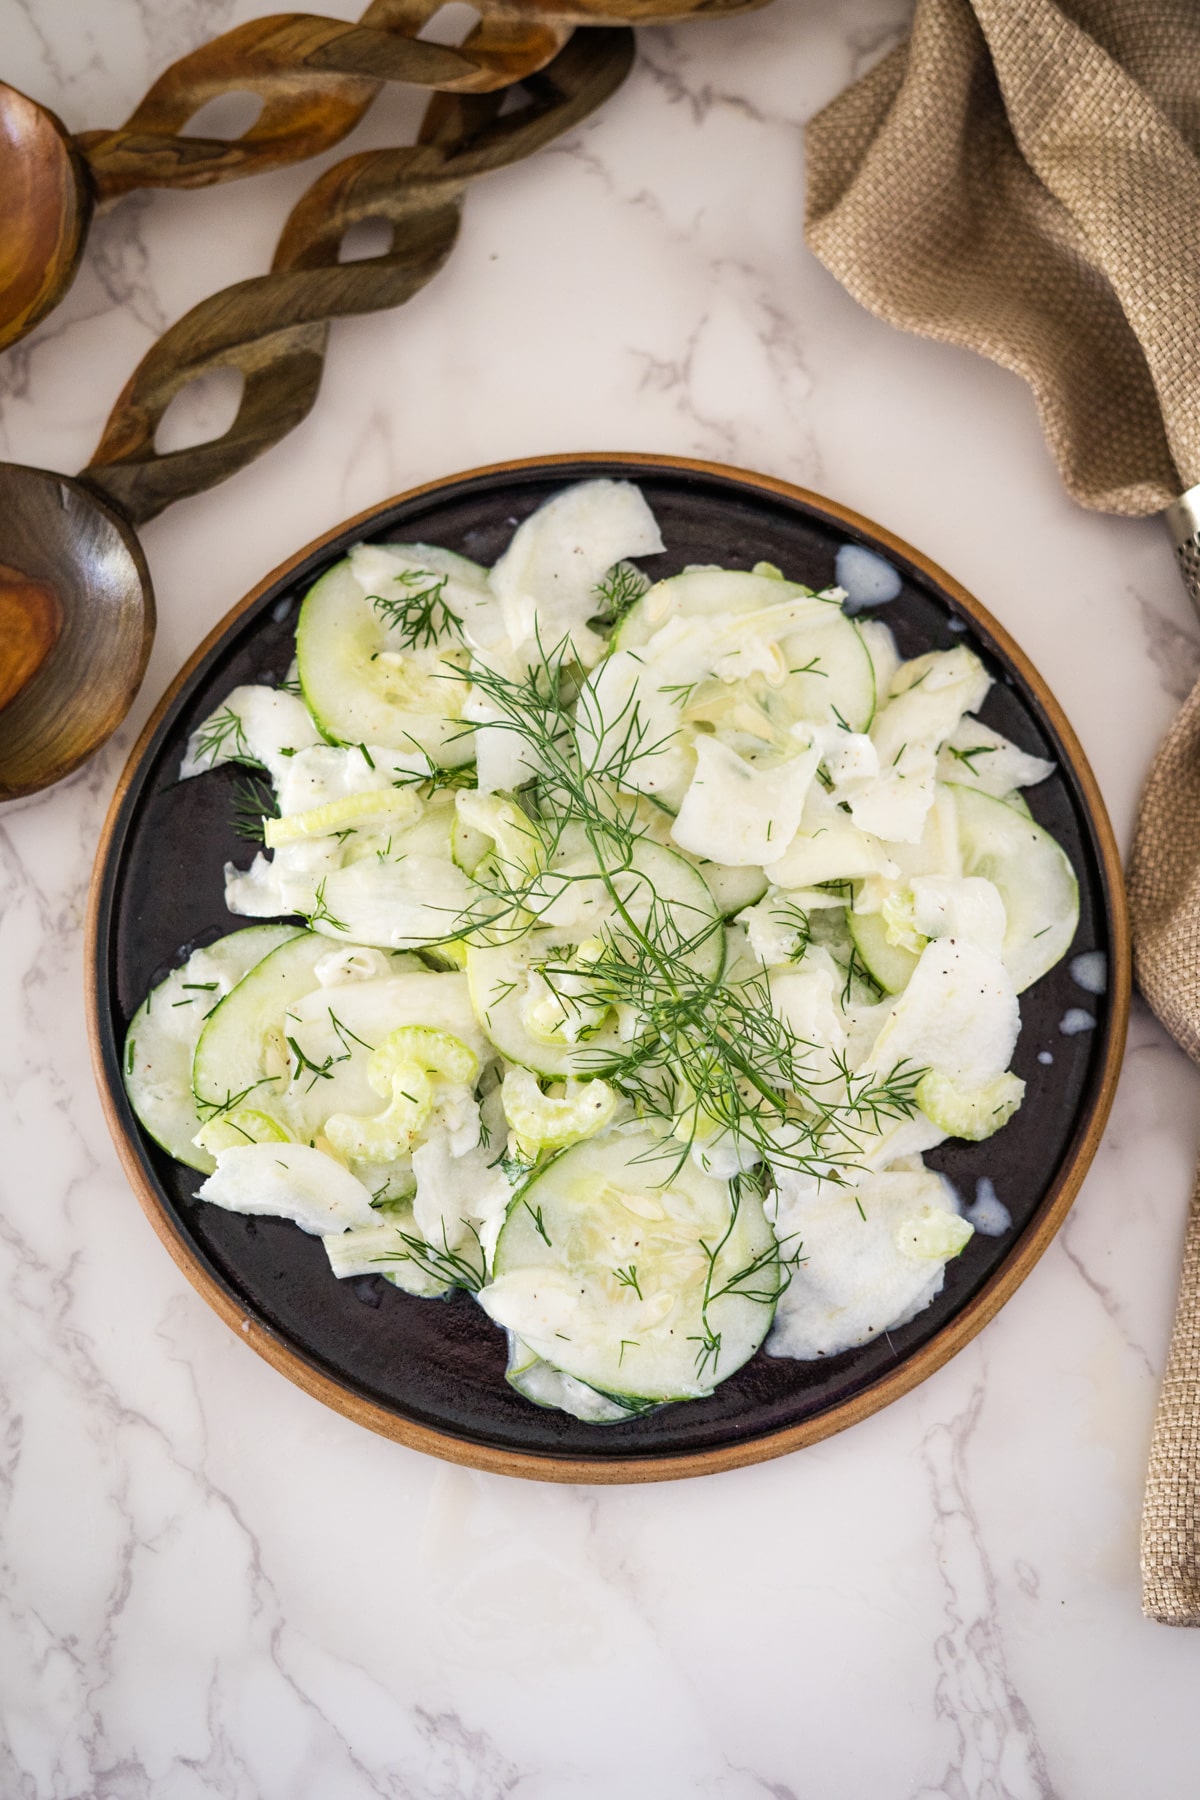 Cucumber and fennel salad with dill on a plate.